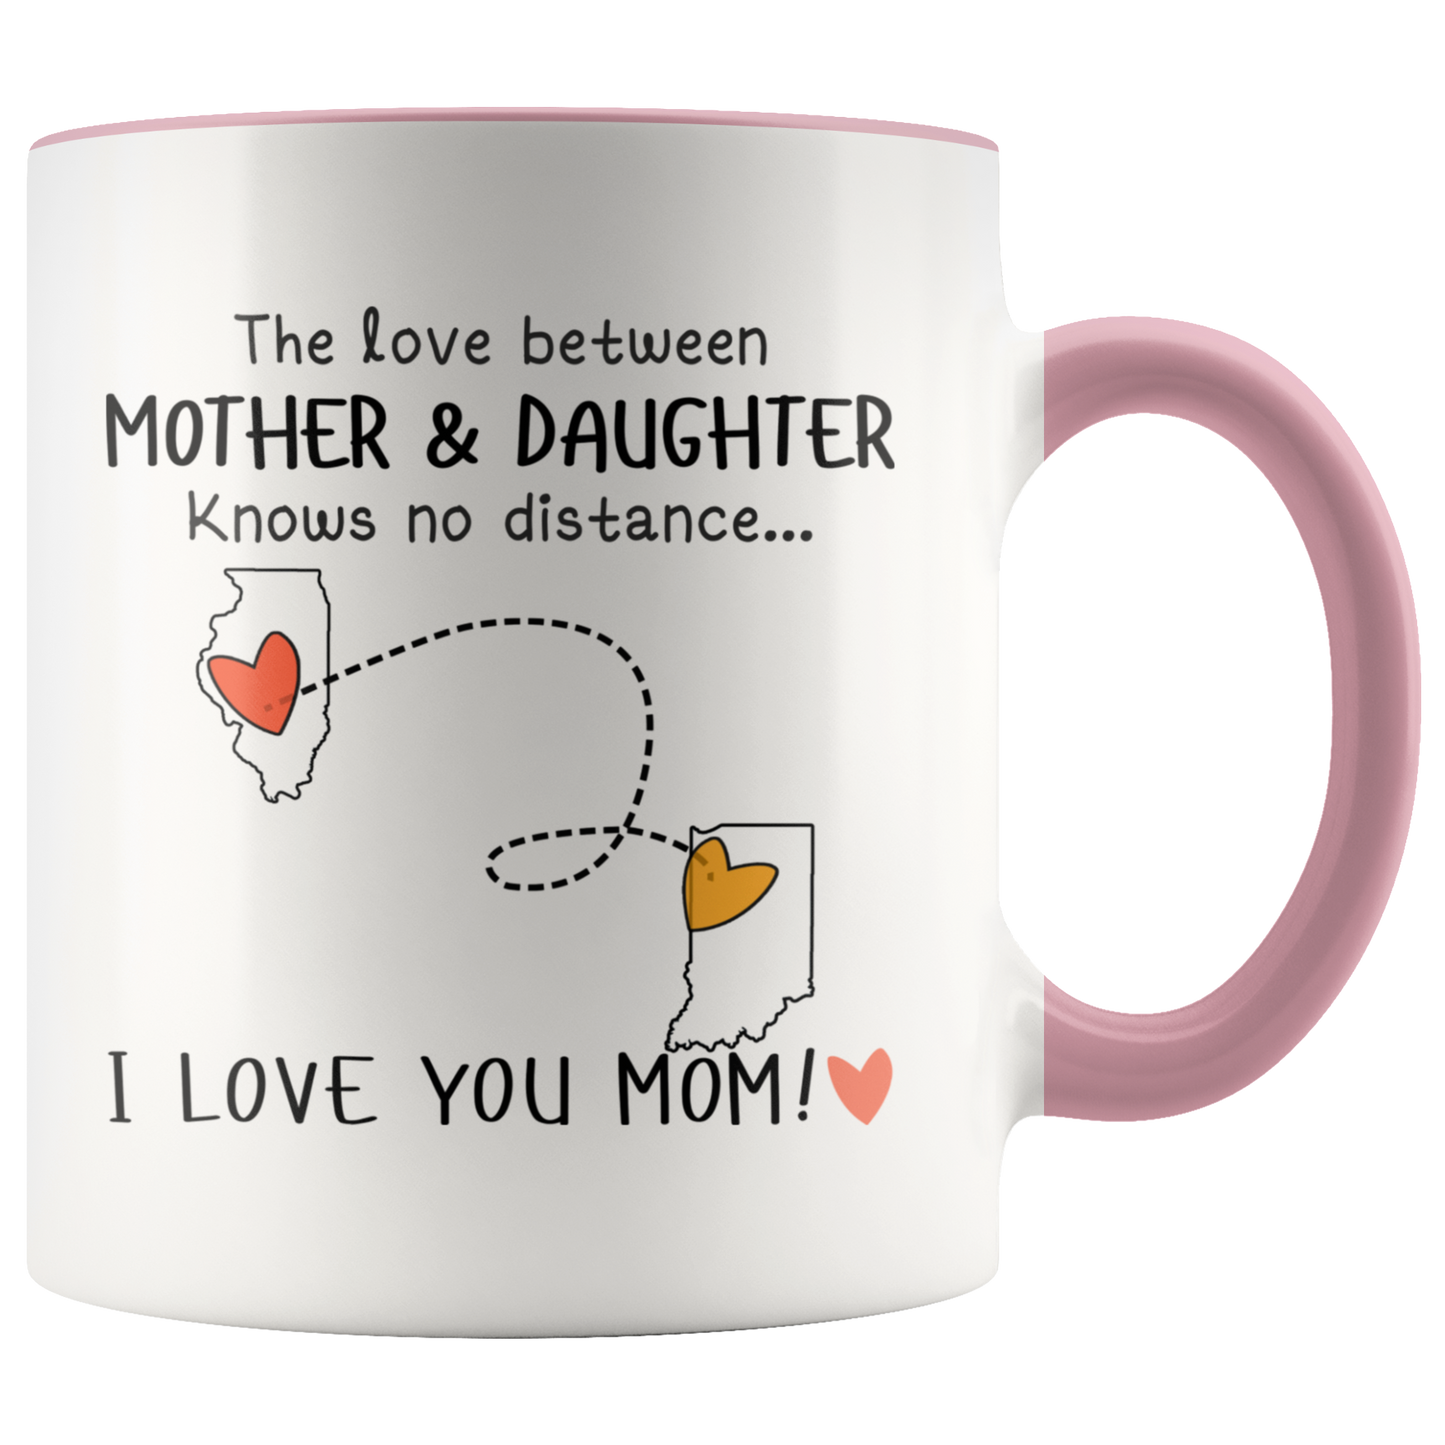 MUG01221337268-sp-23884 - [ Illinois | Indiana ]The Love Between Mother And Daughter Knows No Distance, I Lo